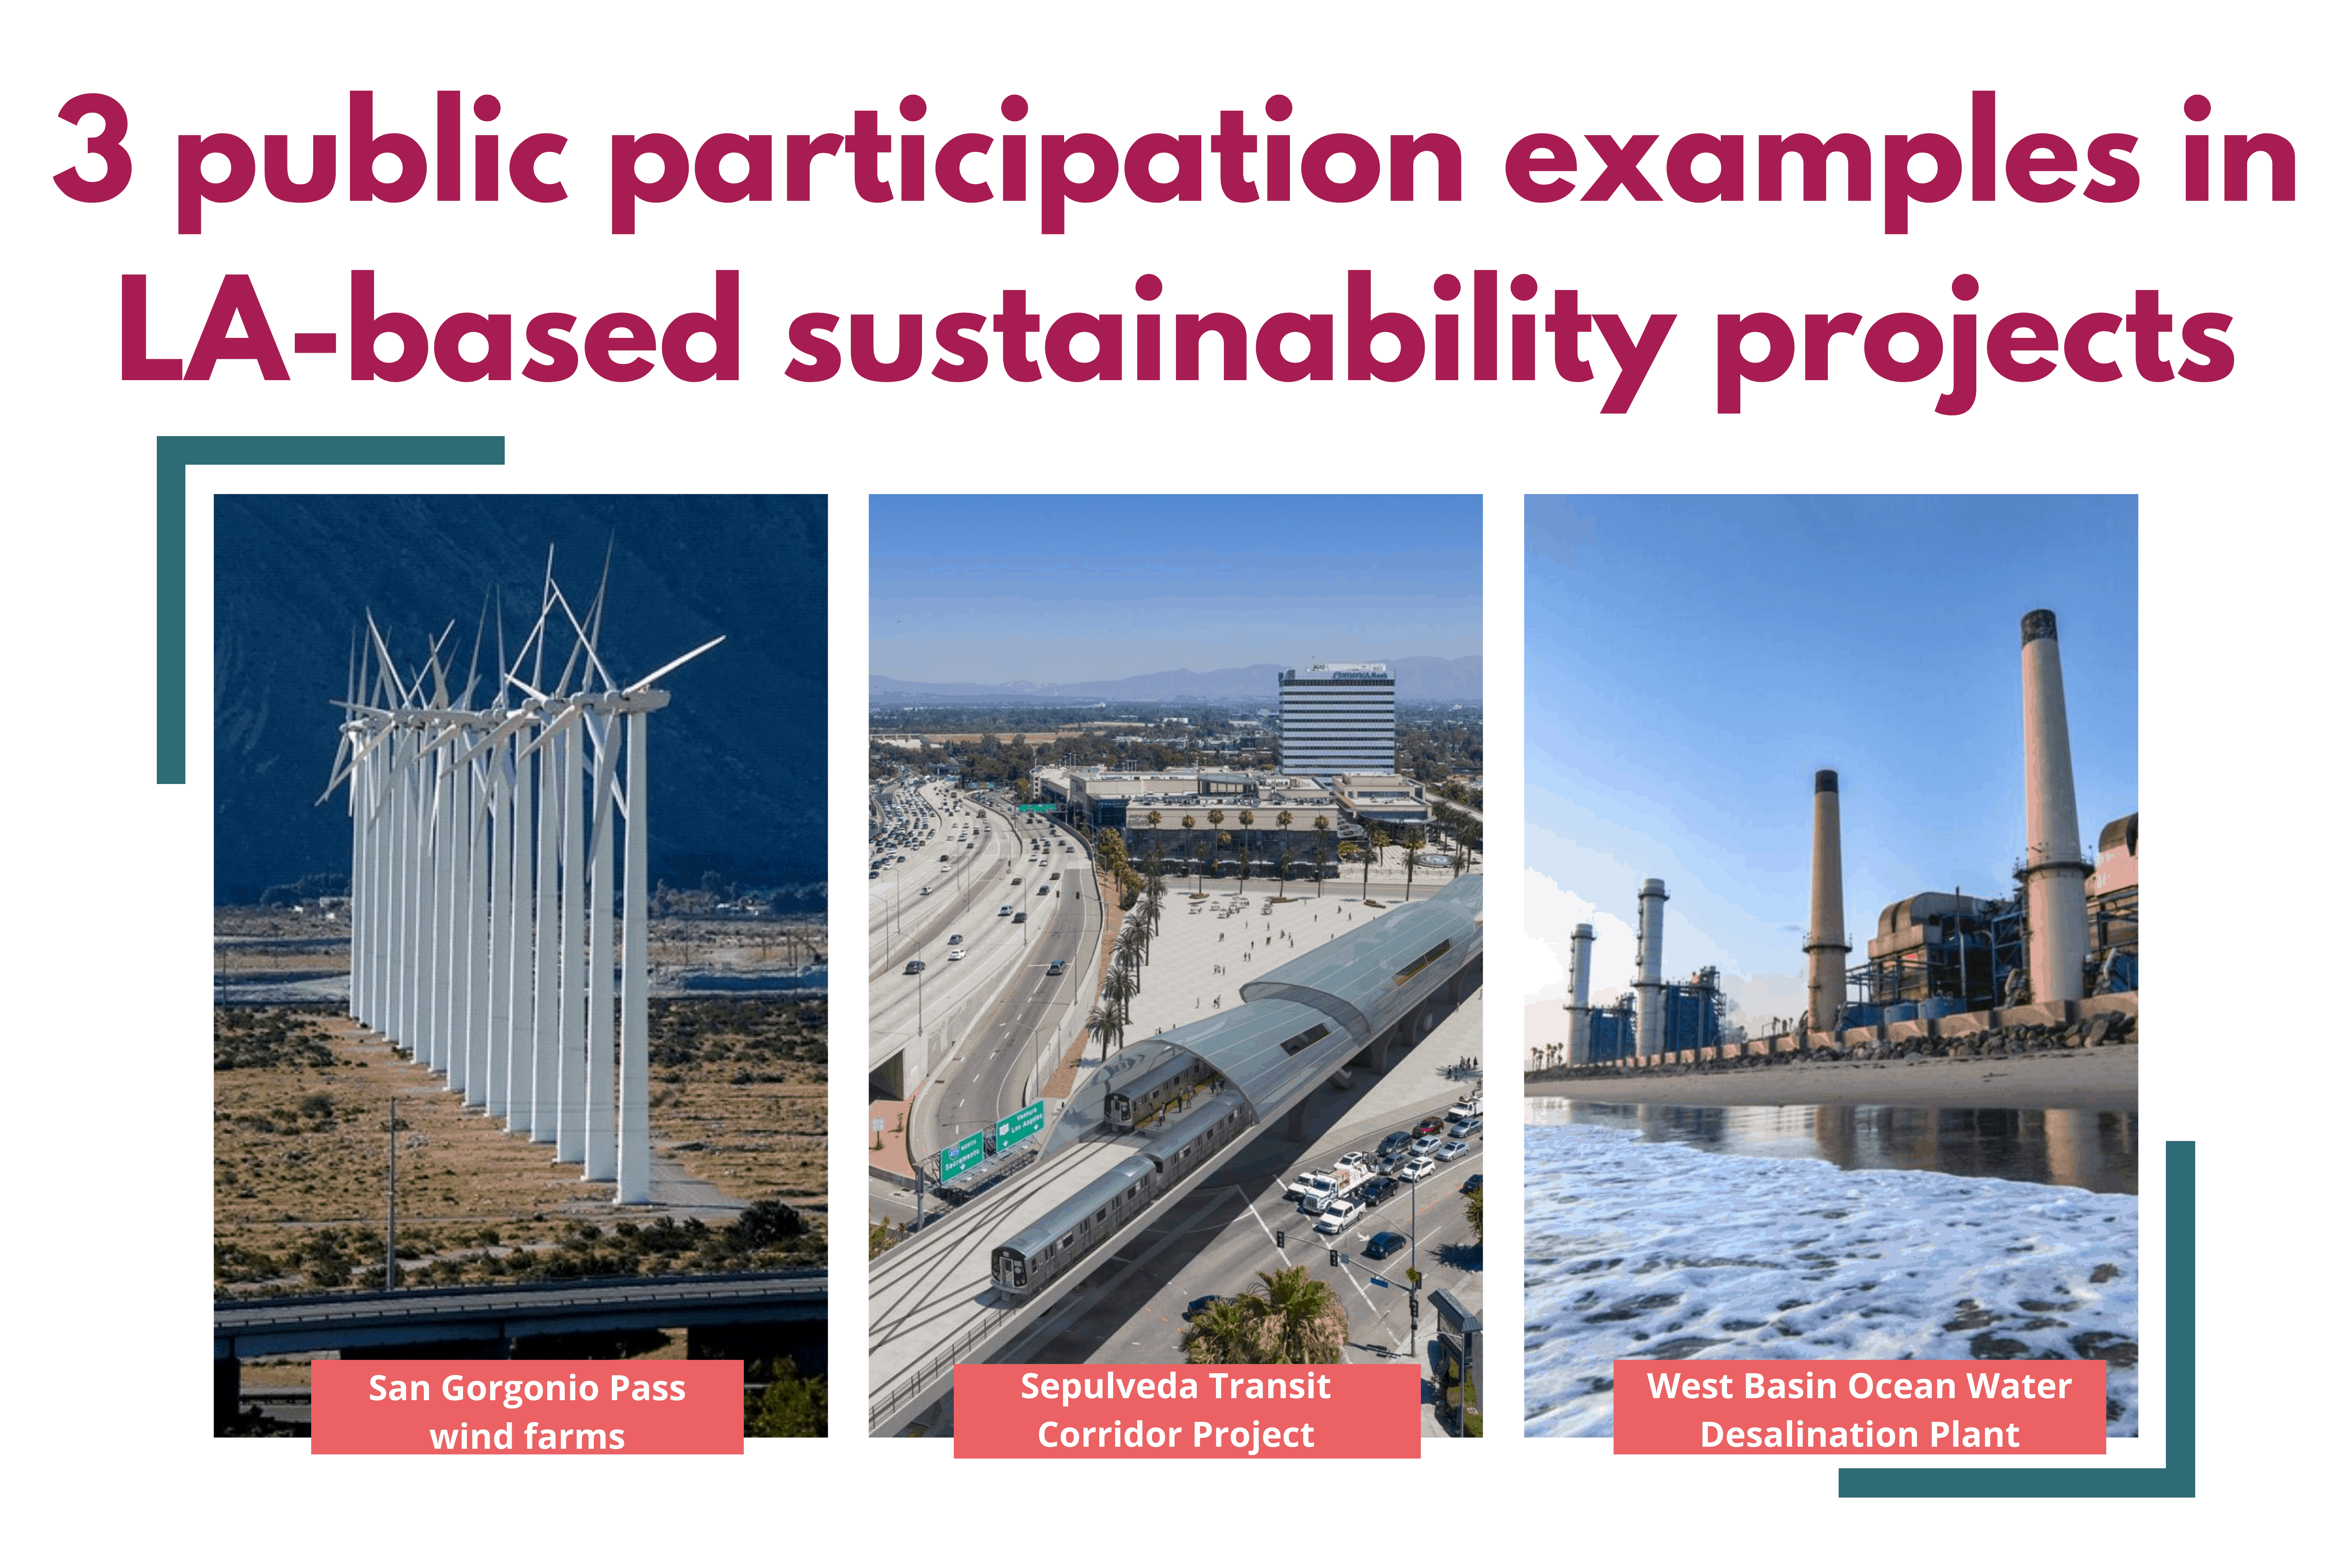 3 public participation examples in LA-based sustainability projects